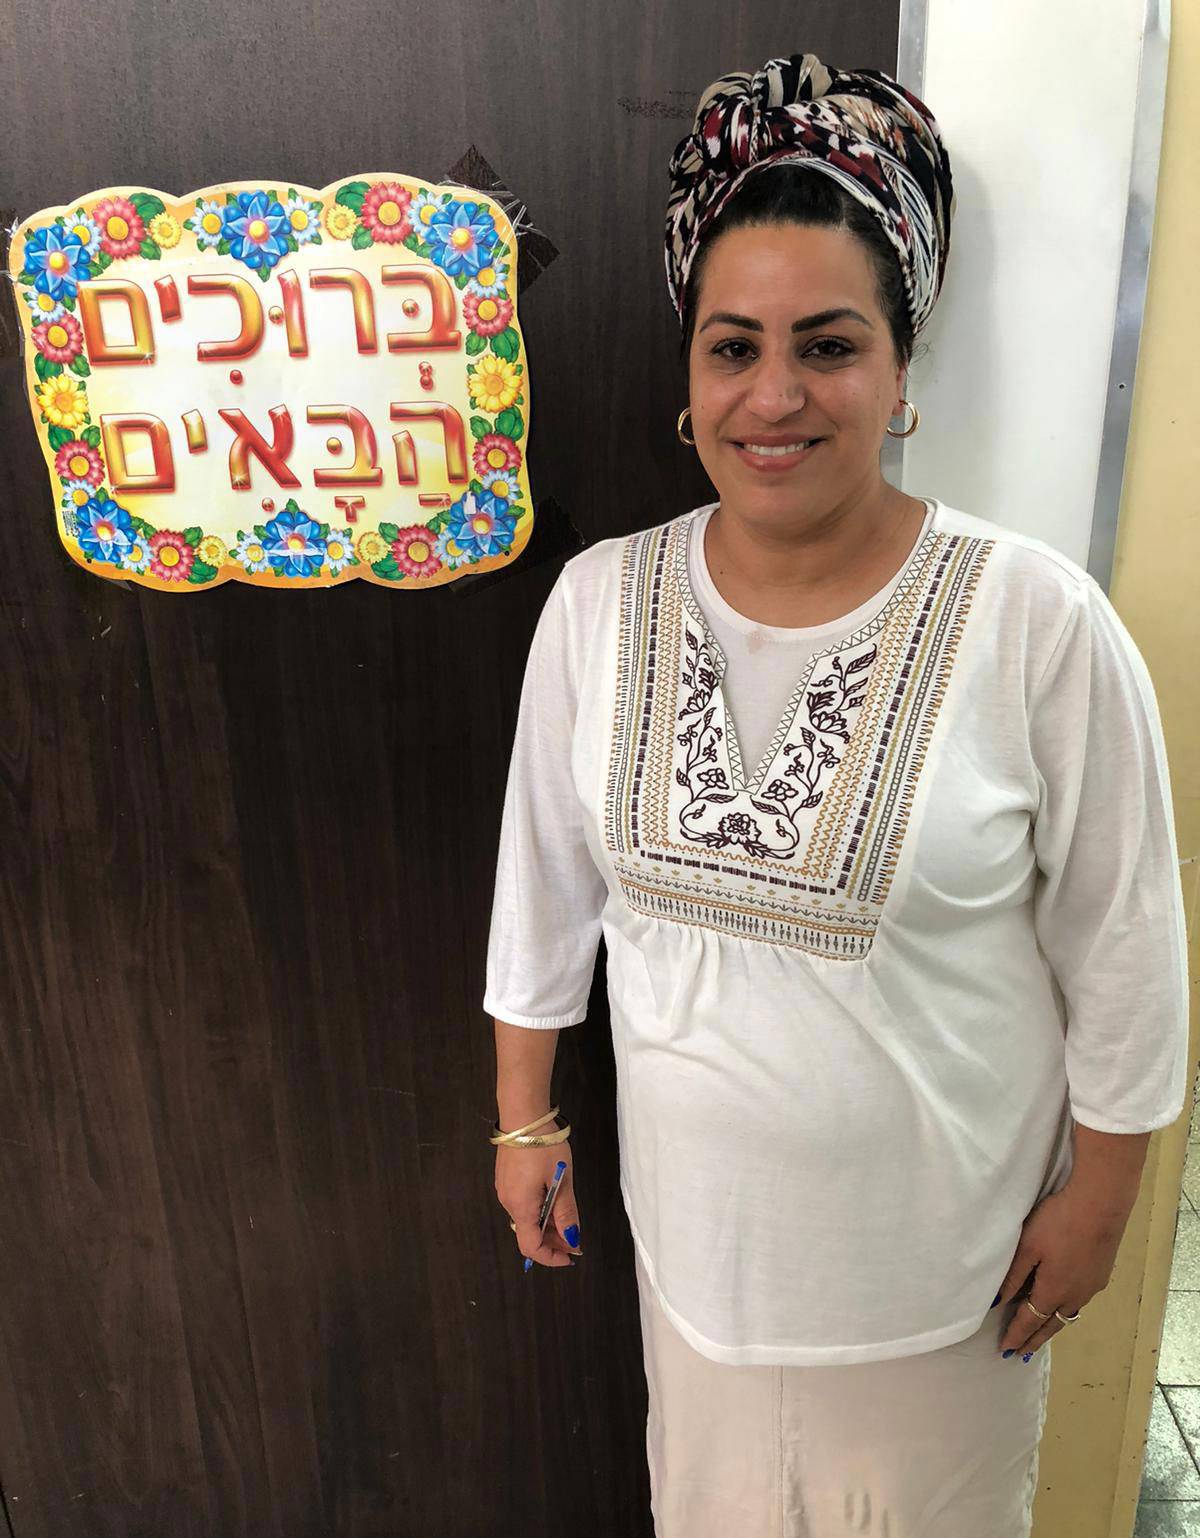 Shimrit Cohen at the door to the classroom where her mother nearly was killed in 1974